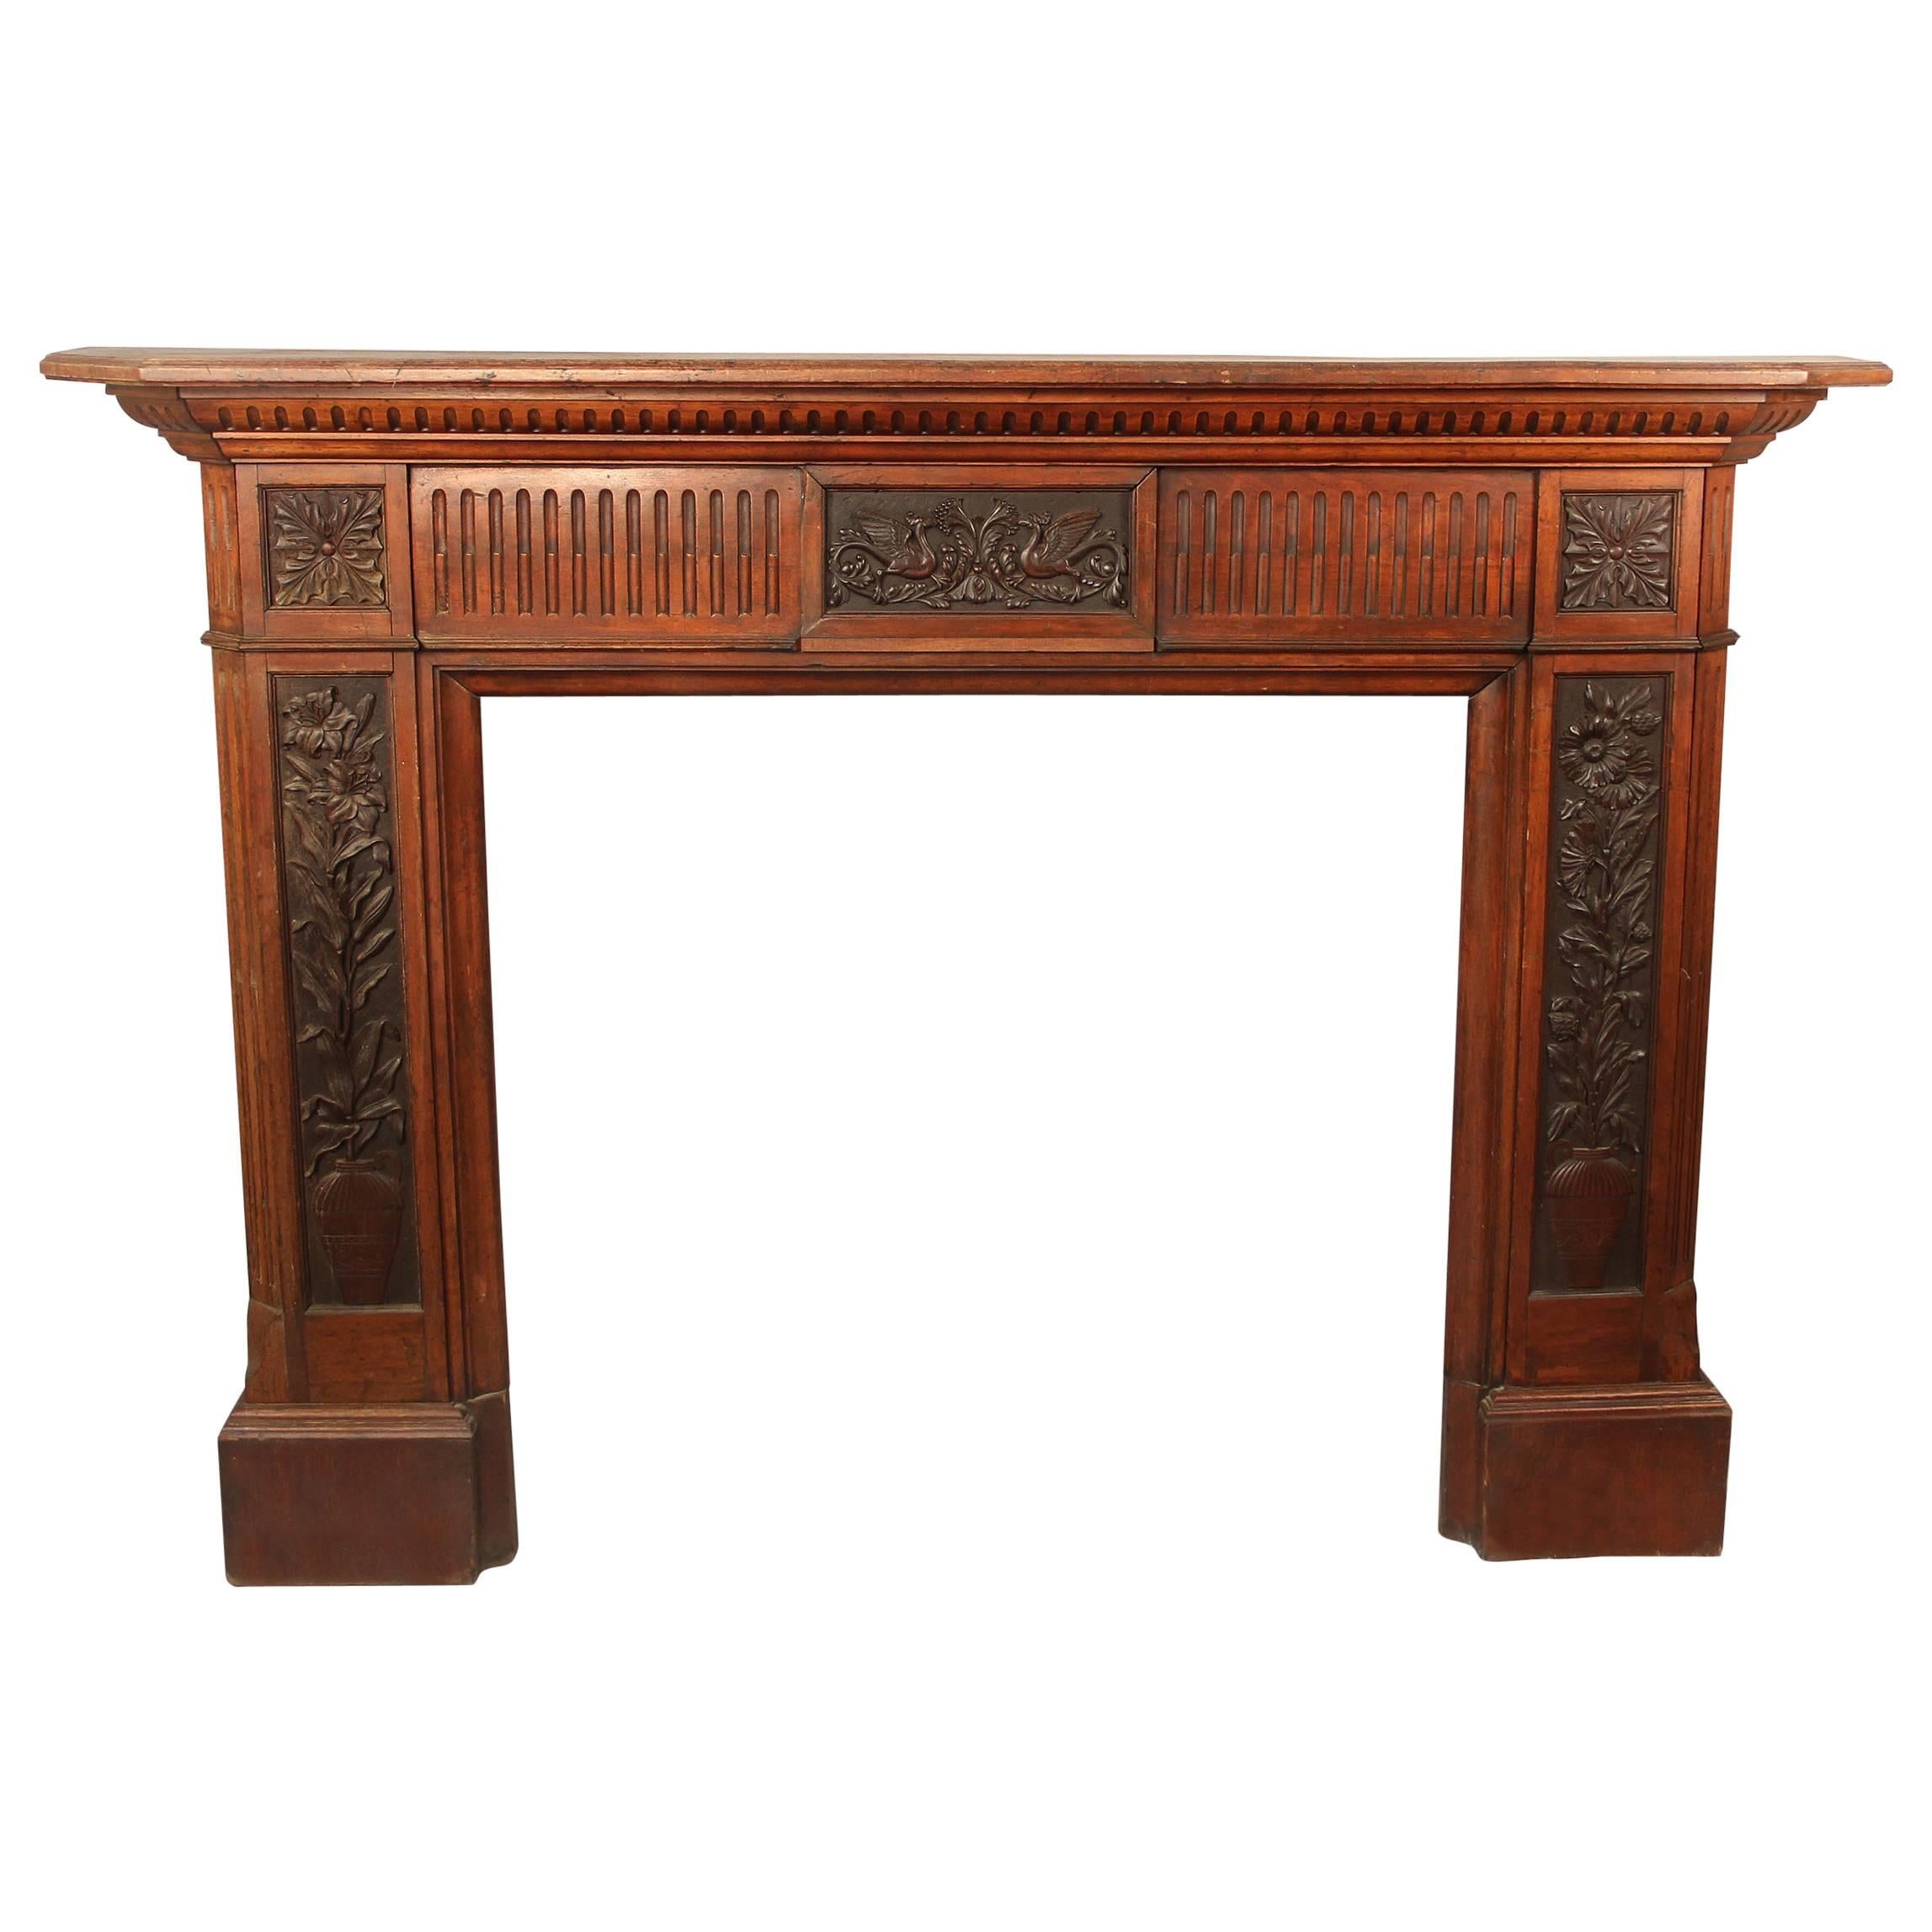 Late 19th Century Louis XVI Style Carved Wood Fireplace Surround